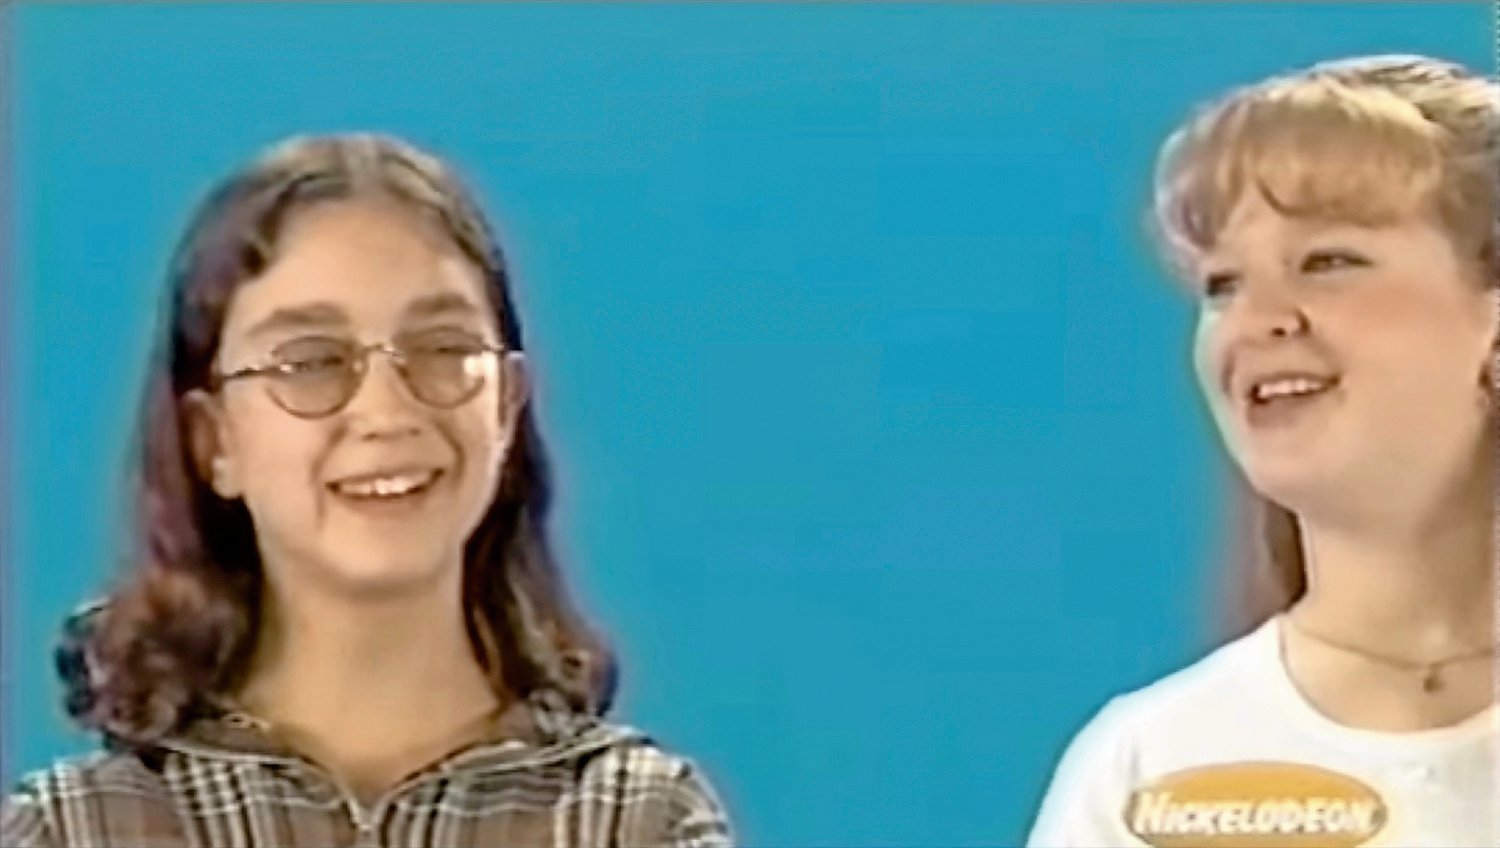 Emily Parson, at left, and Emily Walton shown taking part in the 2000 Nickelodeon TV special ‘Nickellennium — A Nickelodeon Global Youth and & The Future’ documentary. The two best friends will get to perform again at this year’s AIDS Walk as Parson ‘choreographs’ the whole event and Walton sings a special song to kick it off on May 15.